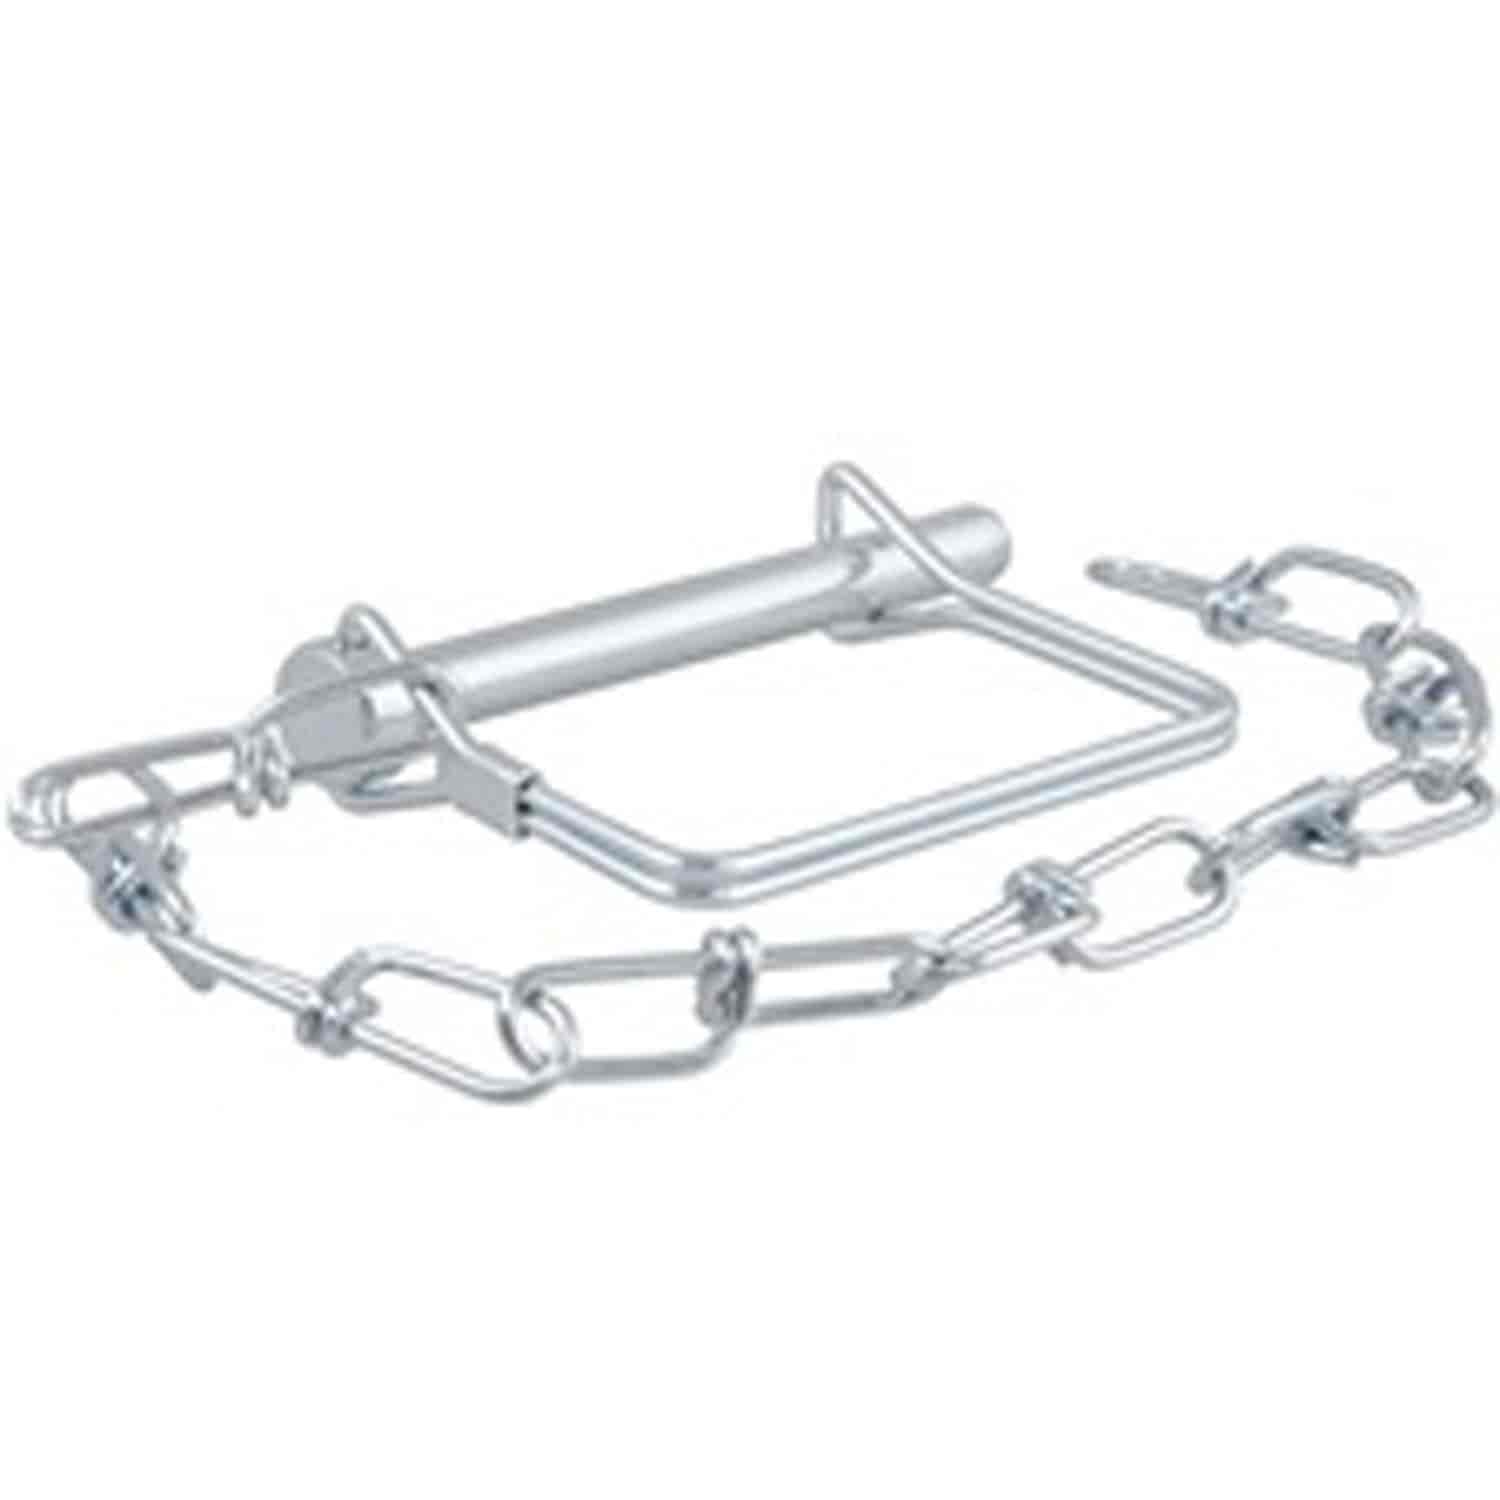 SAFETY PIN 5/16 WITH CHAIN BULK